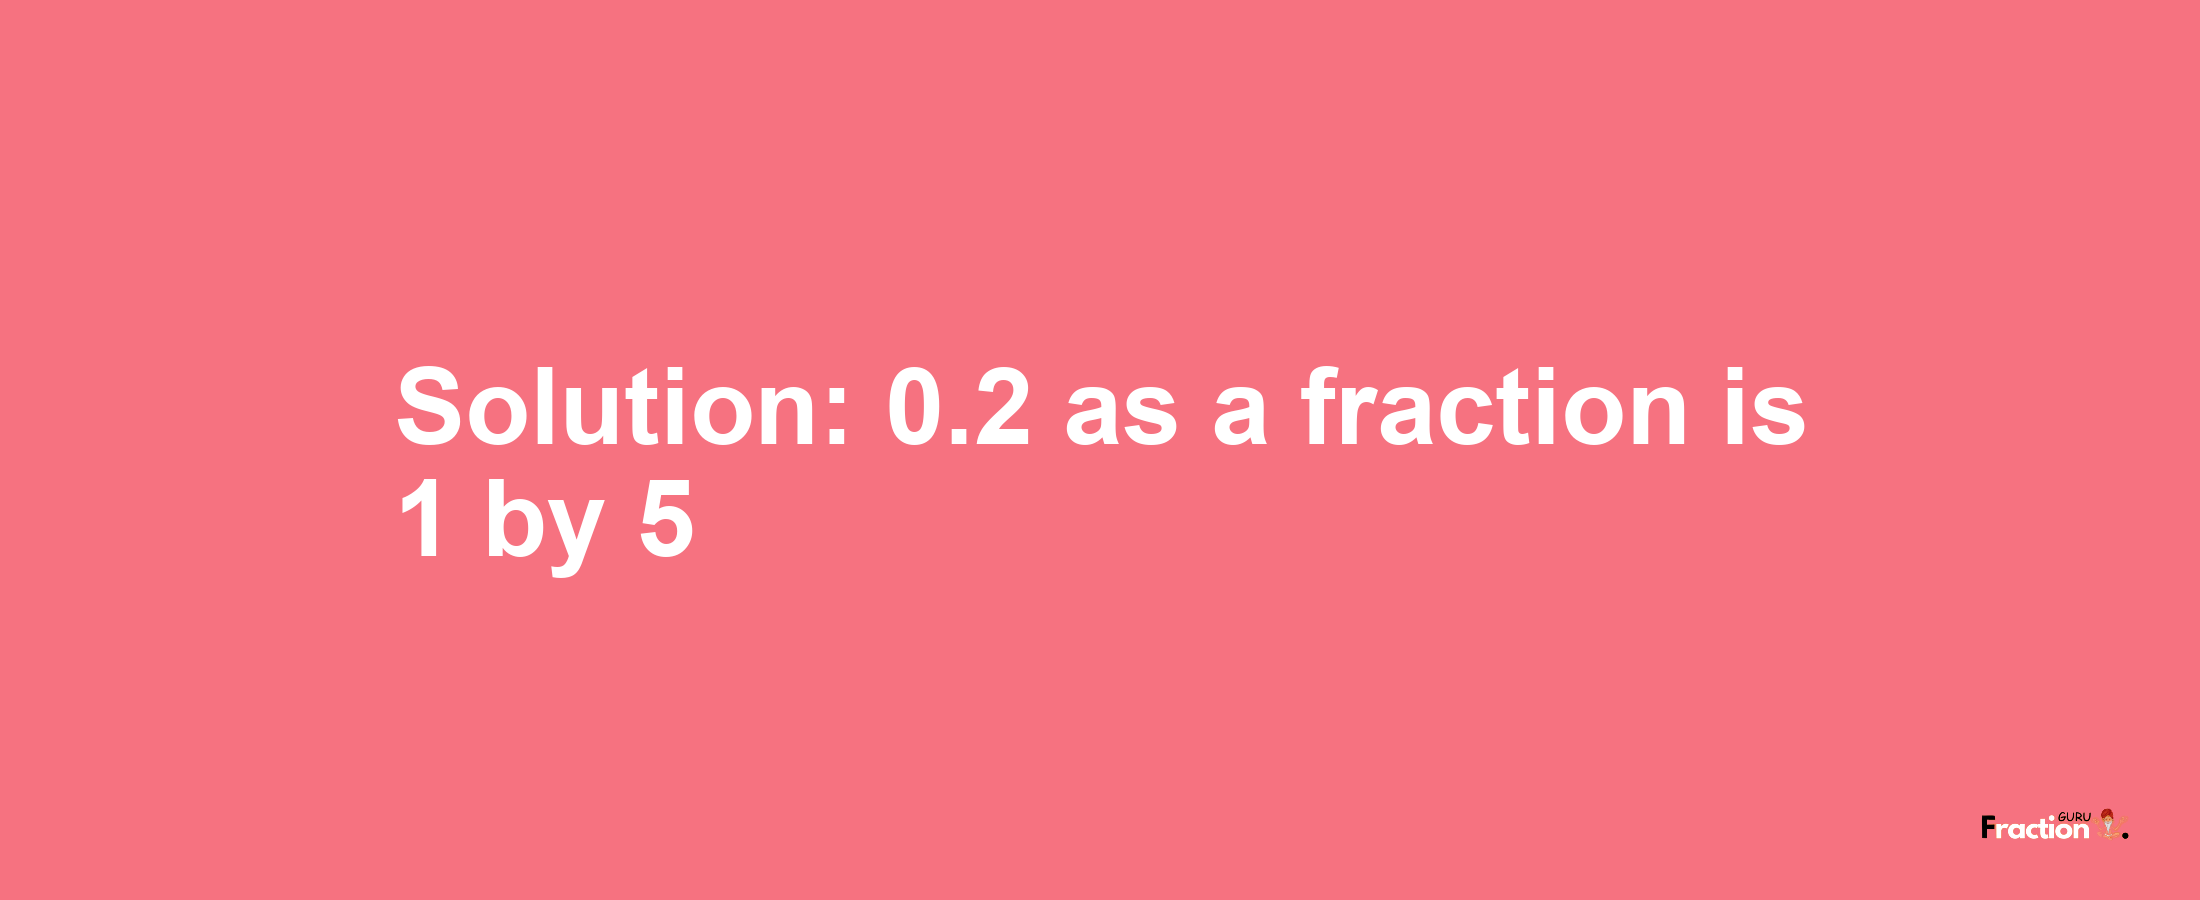 Solution:0.2 as a fraction is 1/5